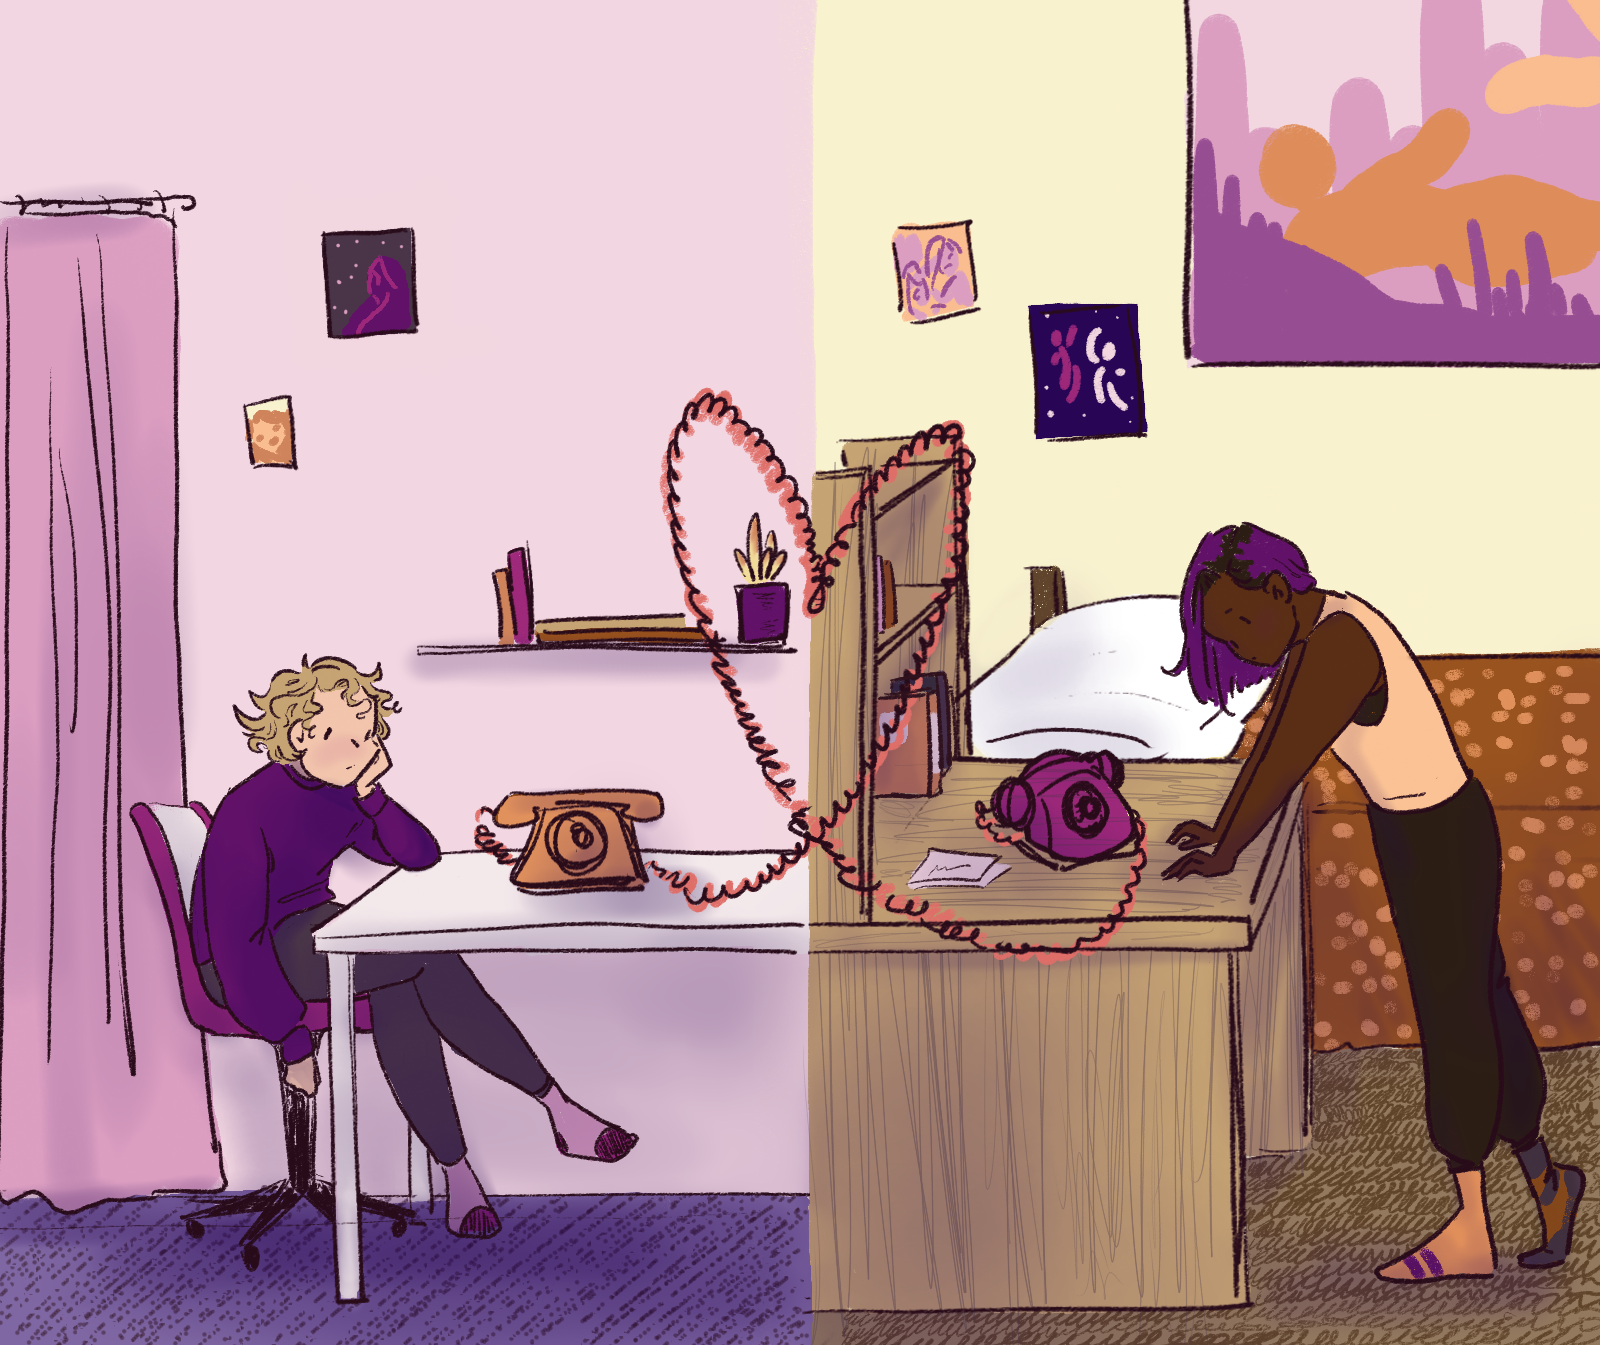 comic depicting two girls waiting by the phone for the other to call, the cords connected in a heart